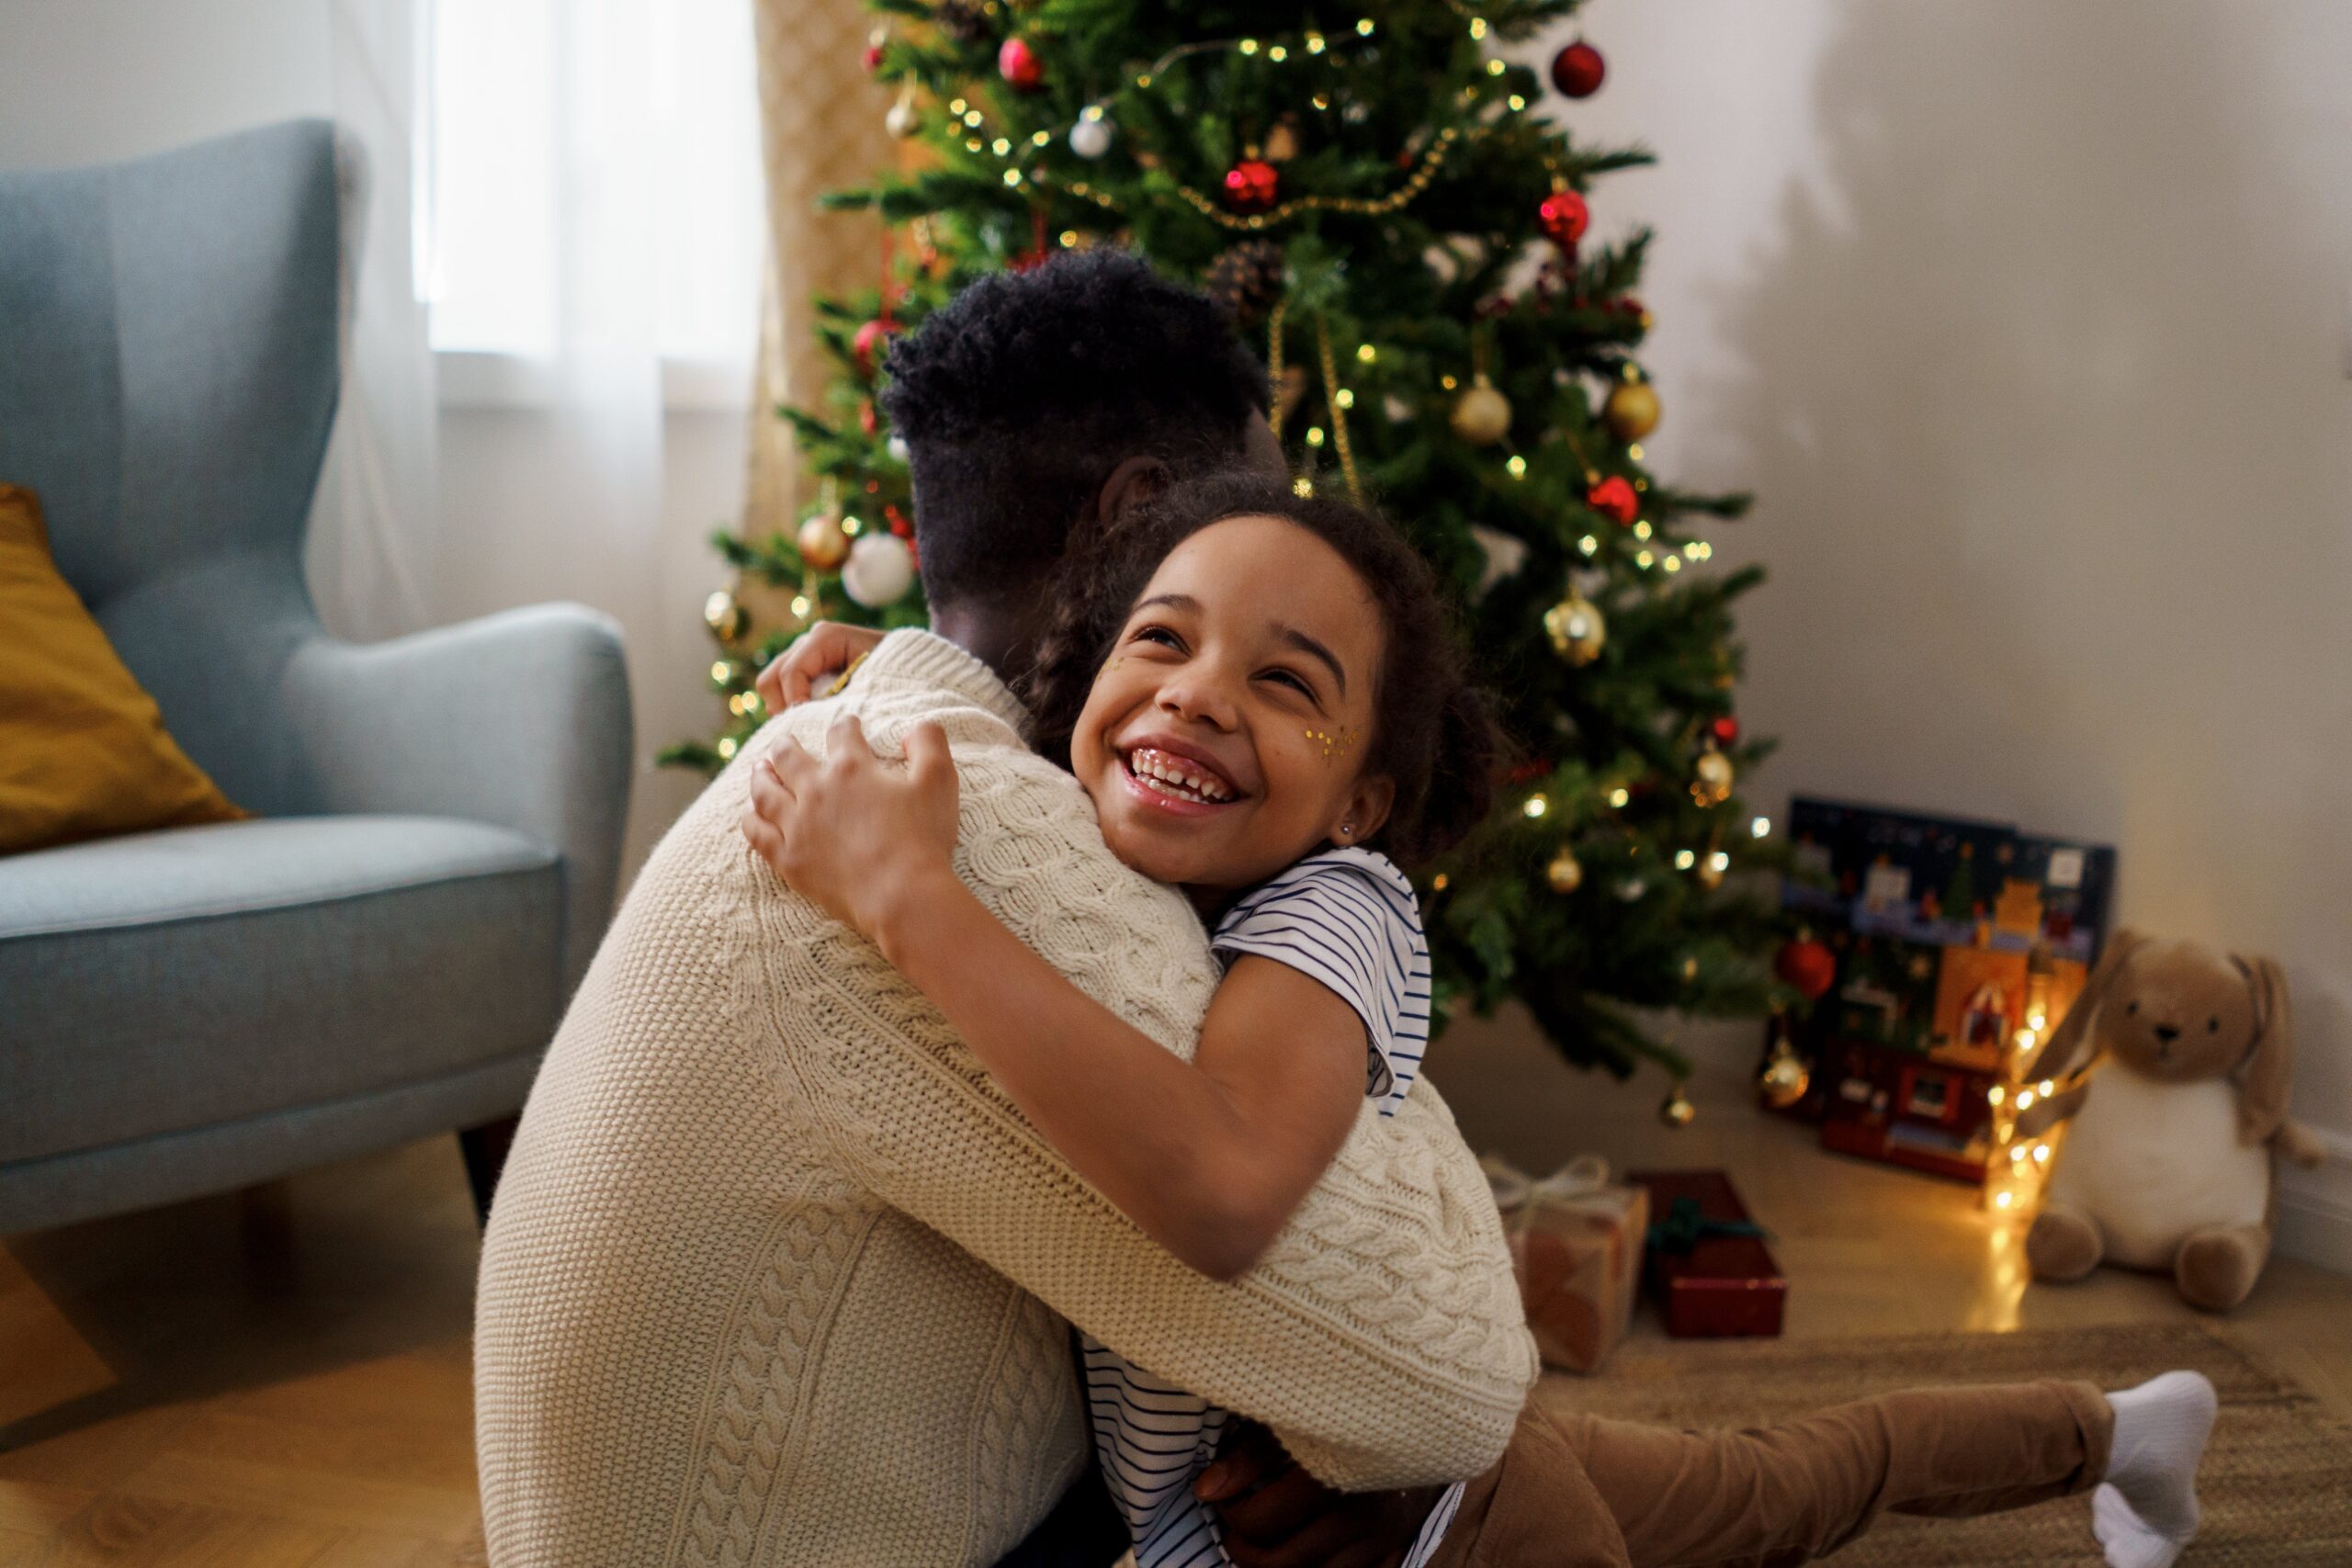 A kid hugging her dad in front of a Christmas tree.